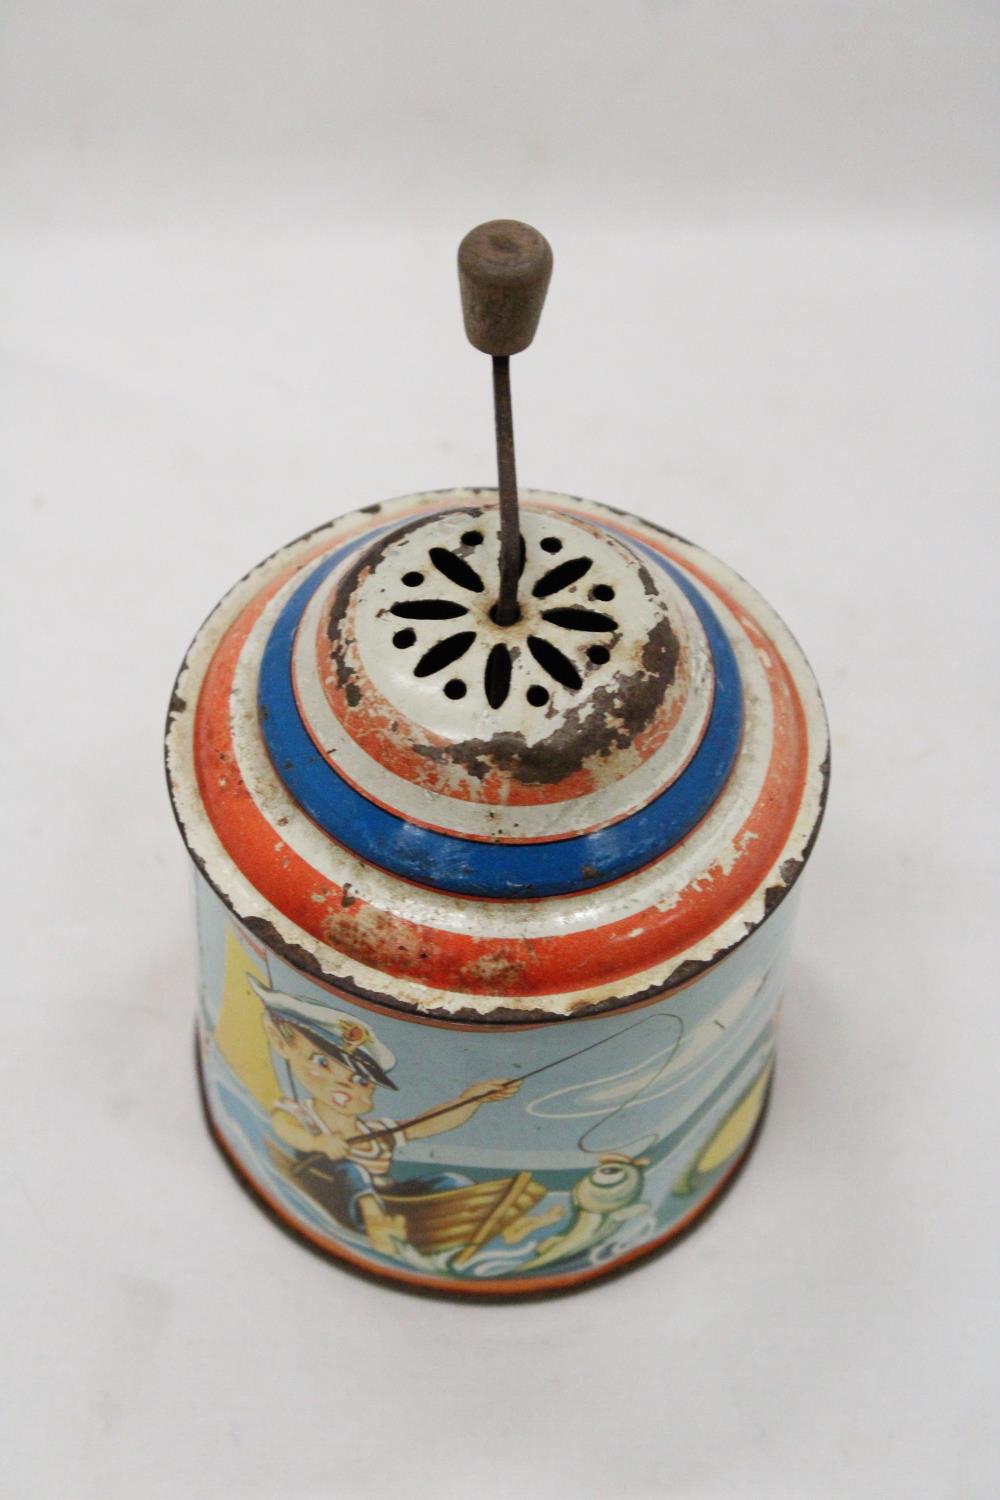 A 1950'S GERMAN TIN PLATE MUSIC BOX IN WORKING ORDER AT TIME OF CATALOGUING - Image 5 of 5